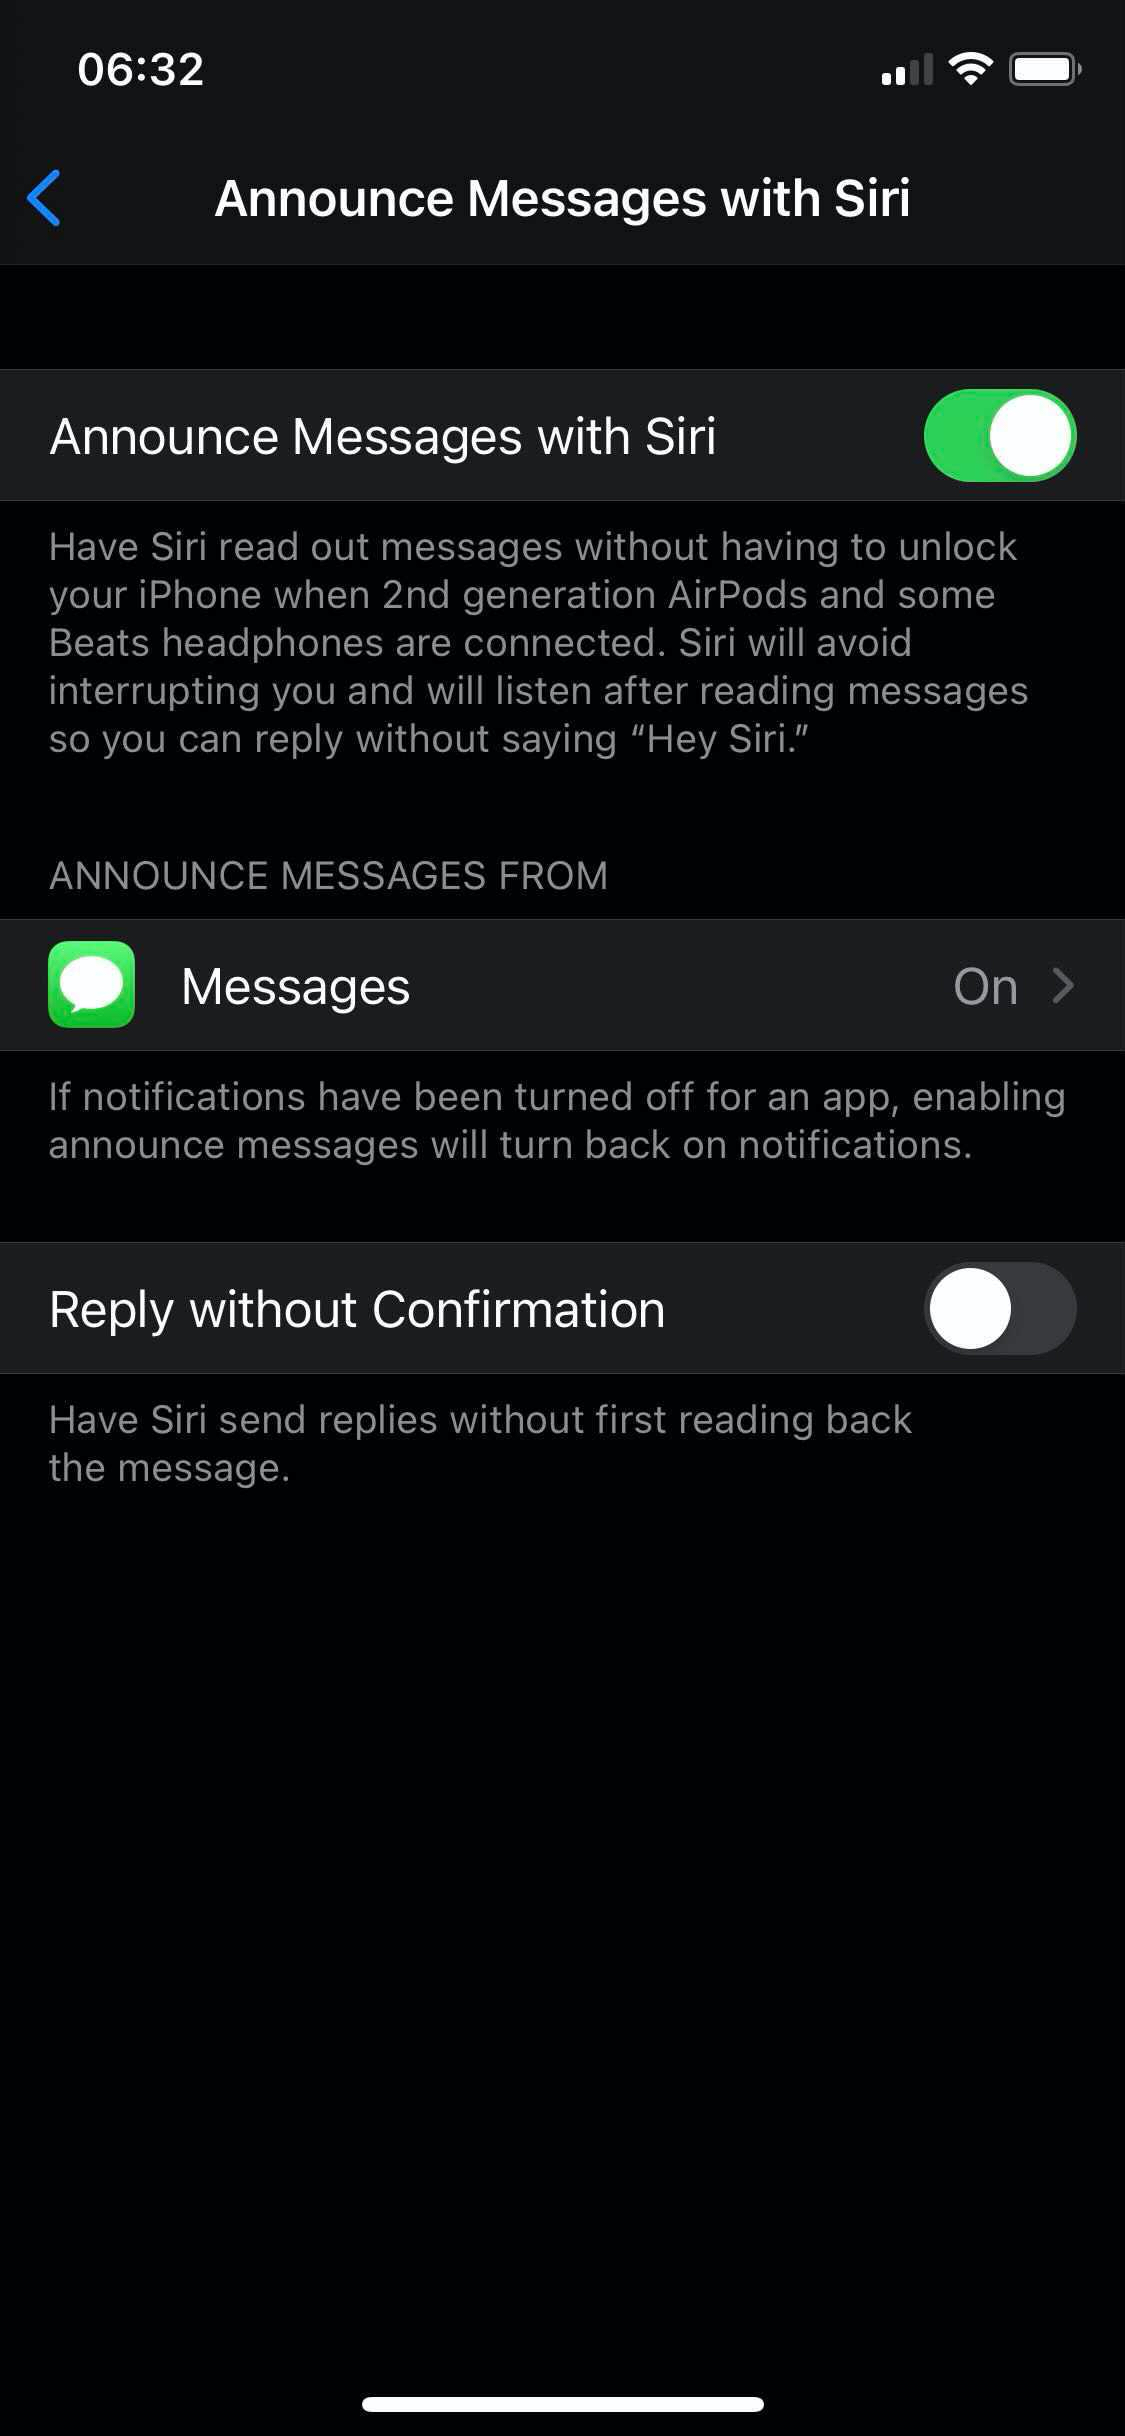 Announce Messages with Siri Enabled on iPhone